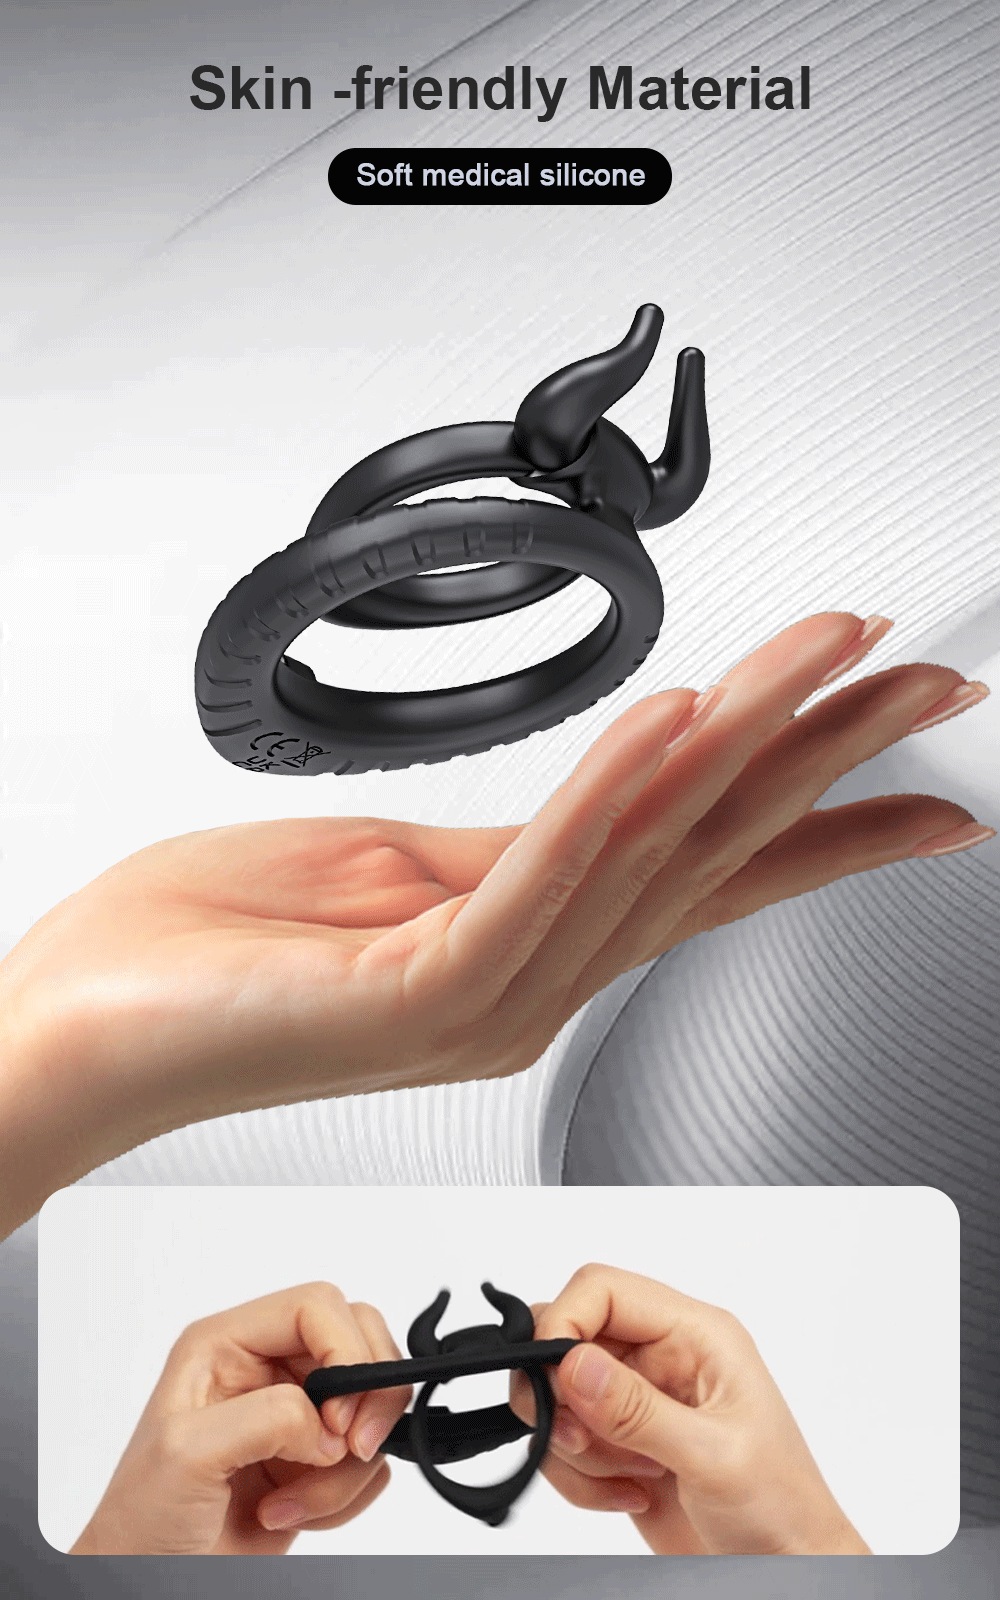 Soft Silicone Chastity Cage Penis Rings For Men - KeepMeLocked